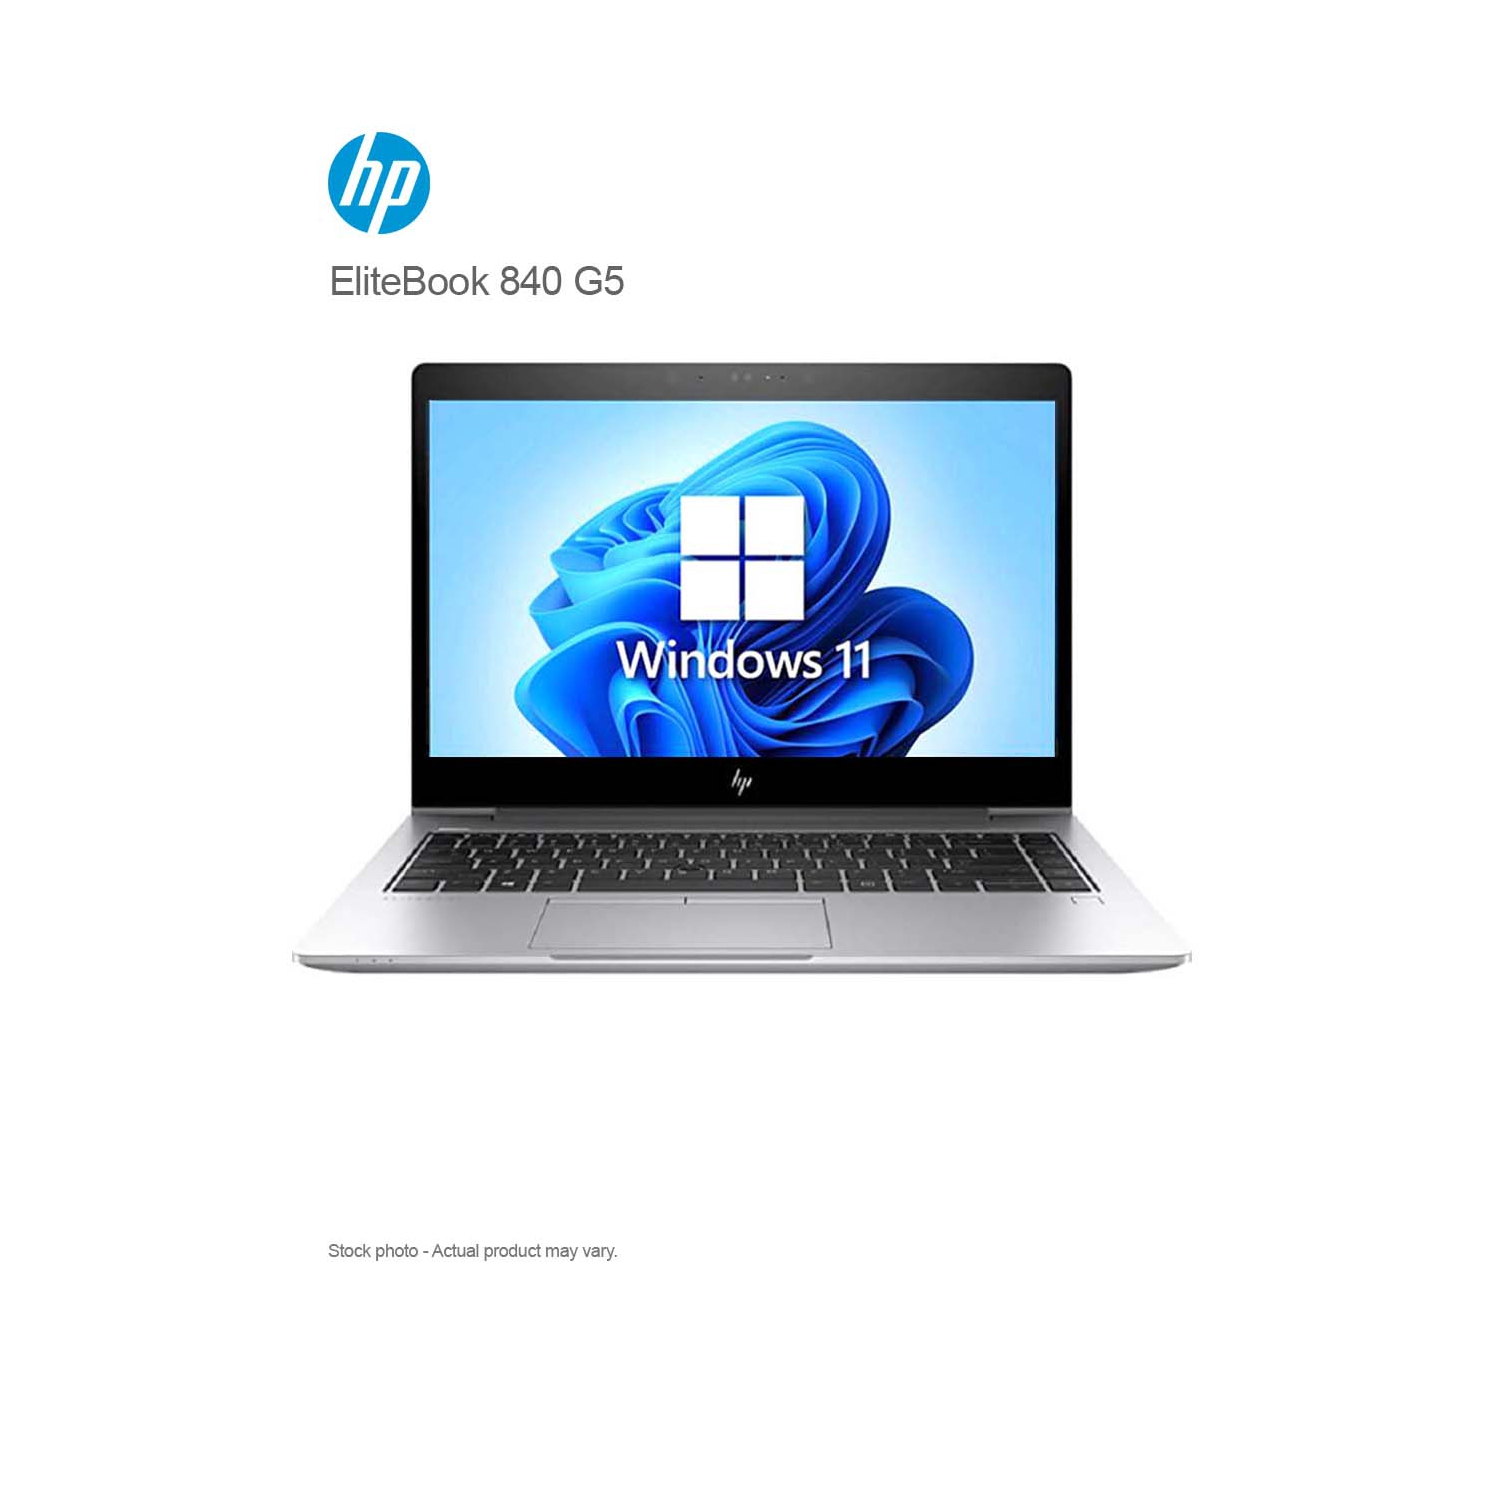 HP EliteBook 840 G5 Core i5-8250U, 16GB, 512GB M.2 NVMe SSD, 14″ FHD 1920 x 1080, Webcam, HDMI, TYPE-C, WIN 11 PRO - Refurbished (Excellent)